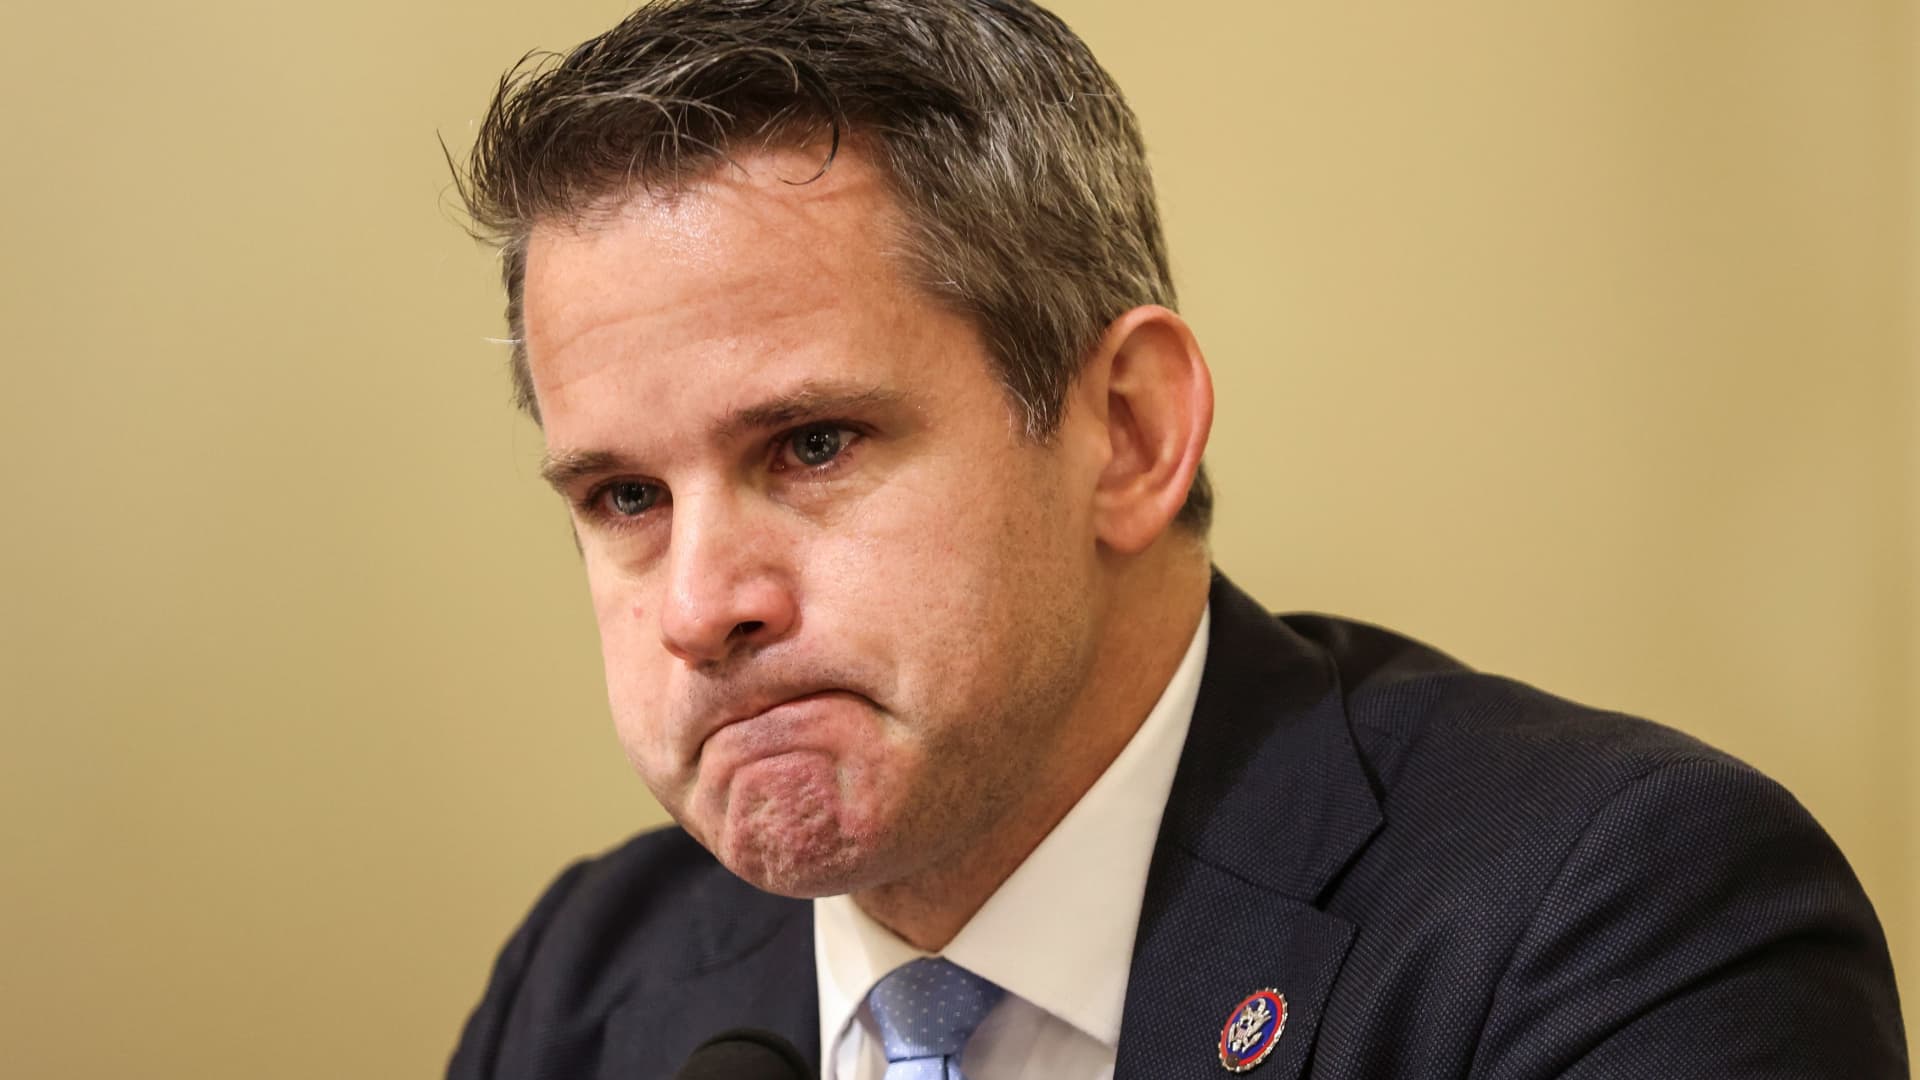 U.S. Rep. Adam Kinzinger gets emotional as he speaks during a hearing by the House Select Committee investigating the Jan. 6 attack on Capitol Hill in Washington, U.S., July 27, 2021.